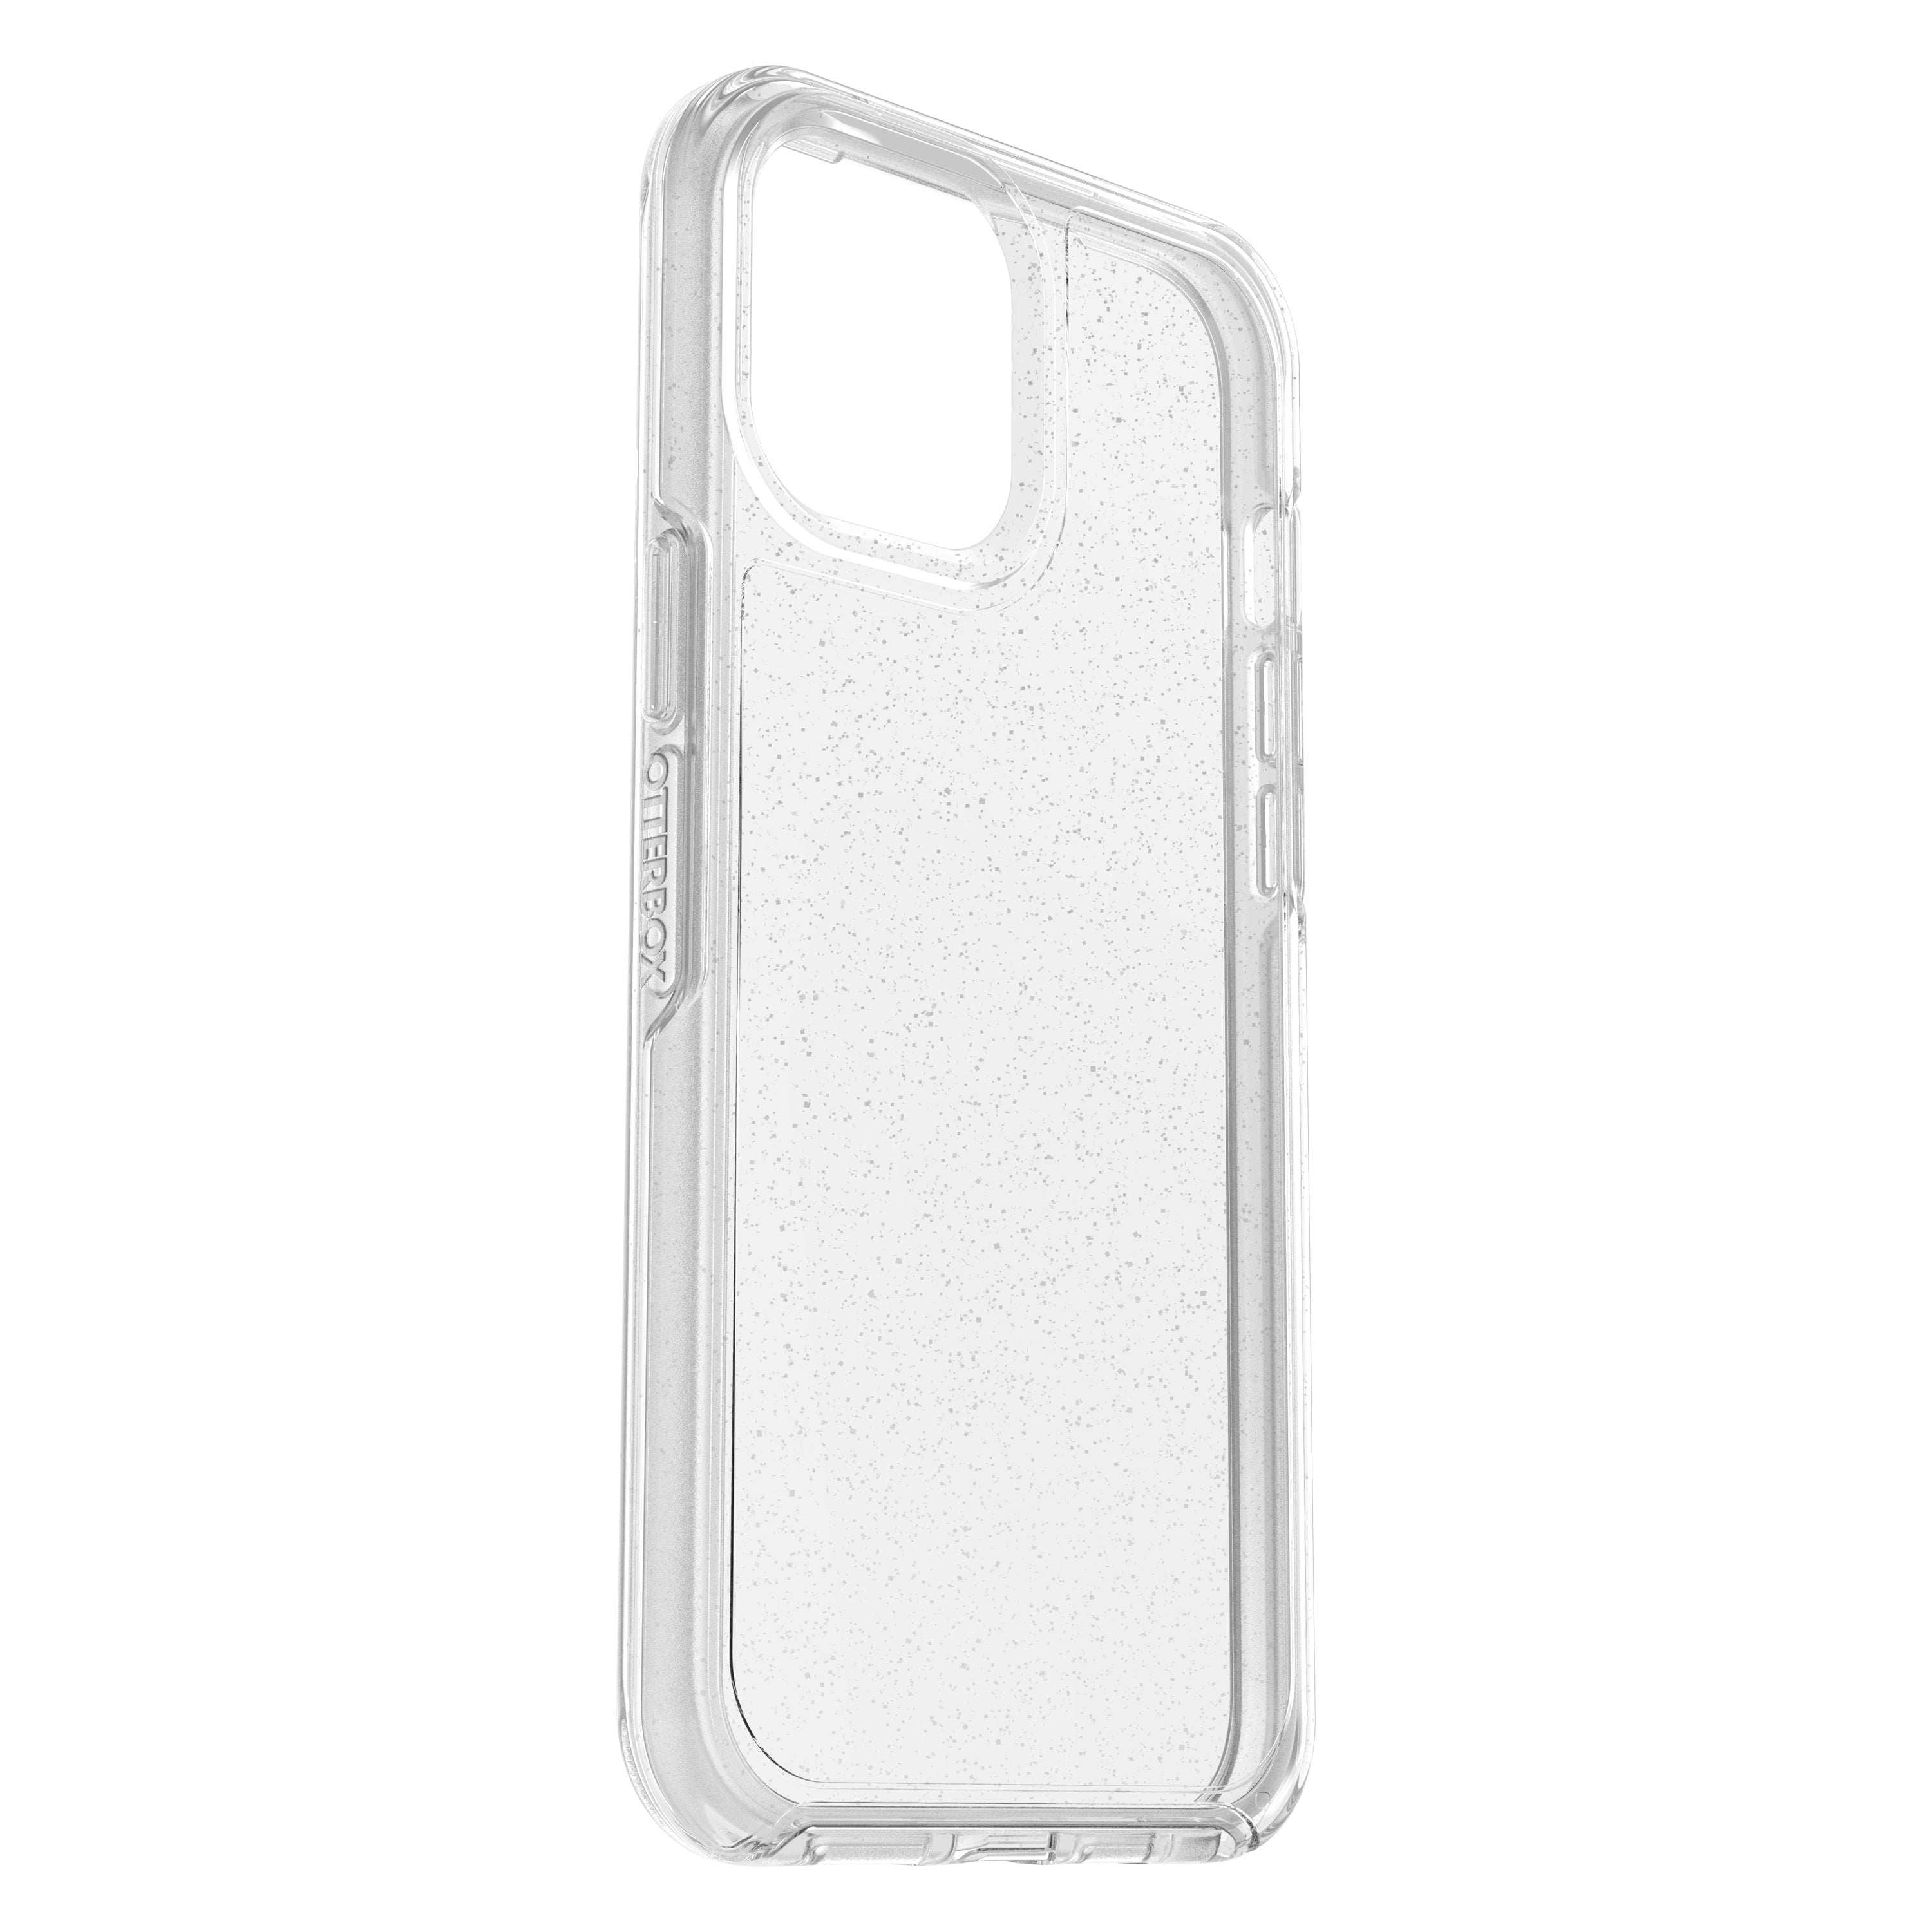 OtterBox Apple iPhone 12 Pro Max SYMMETRY Clear case - Slim and Lightweight Cover w/ Military Grade Drop Protection, Wireless Charging Compatible - Stardust